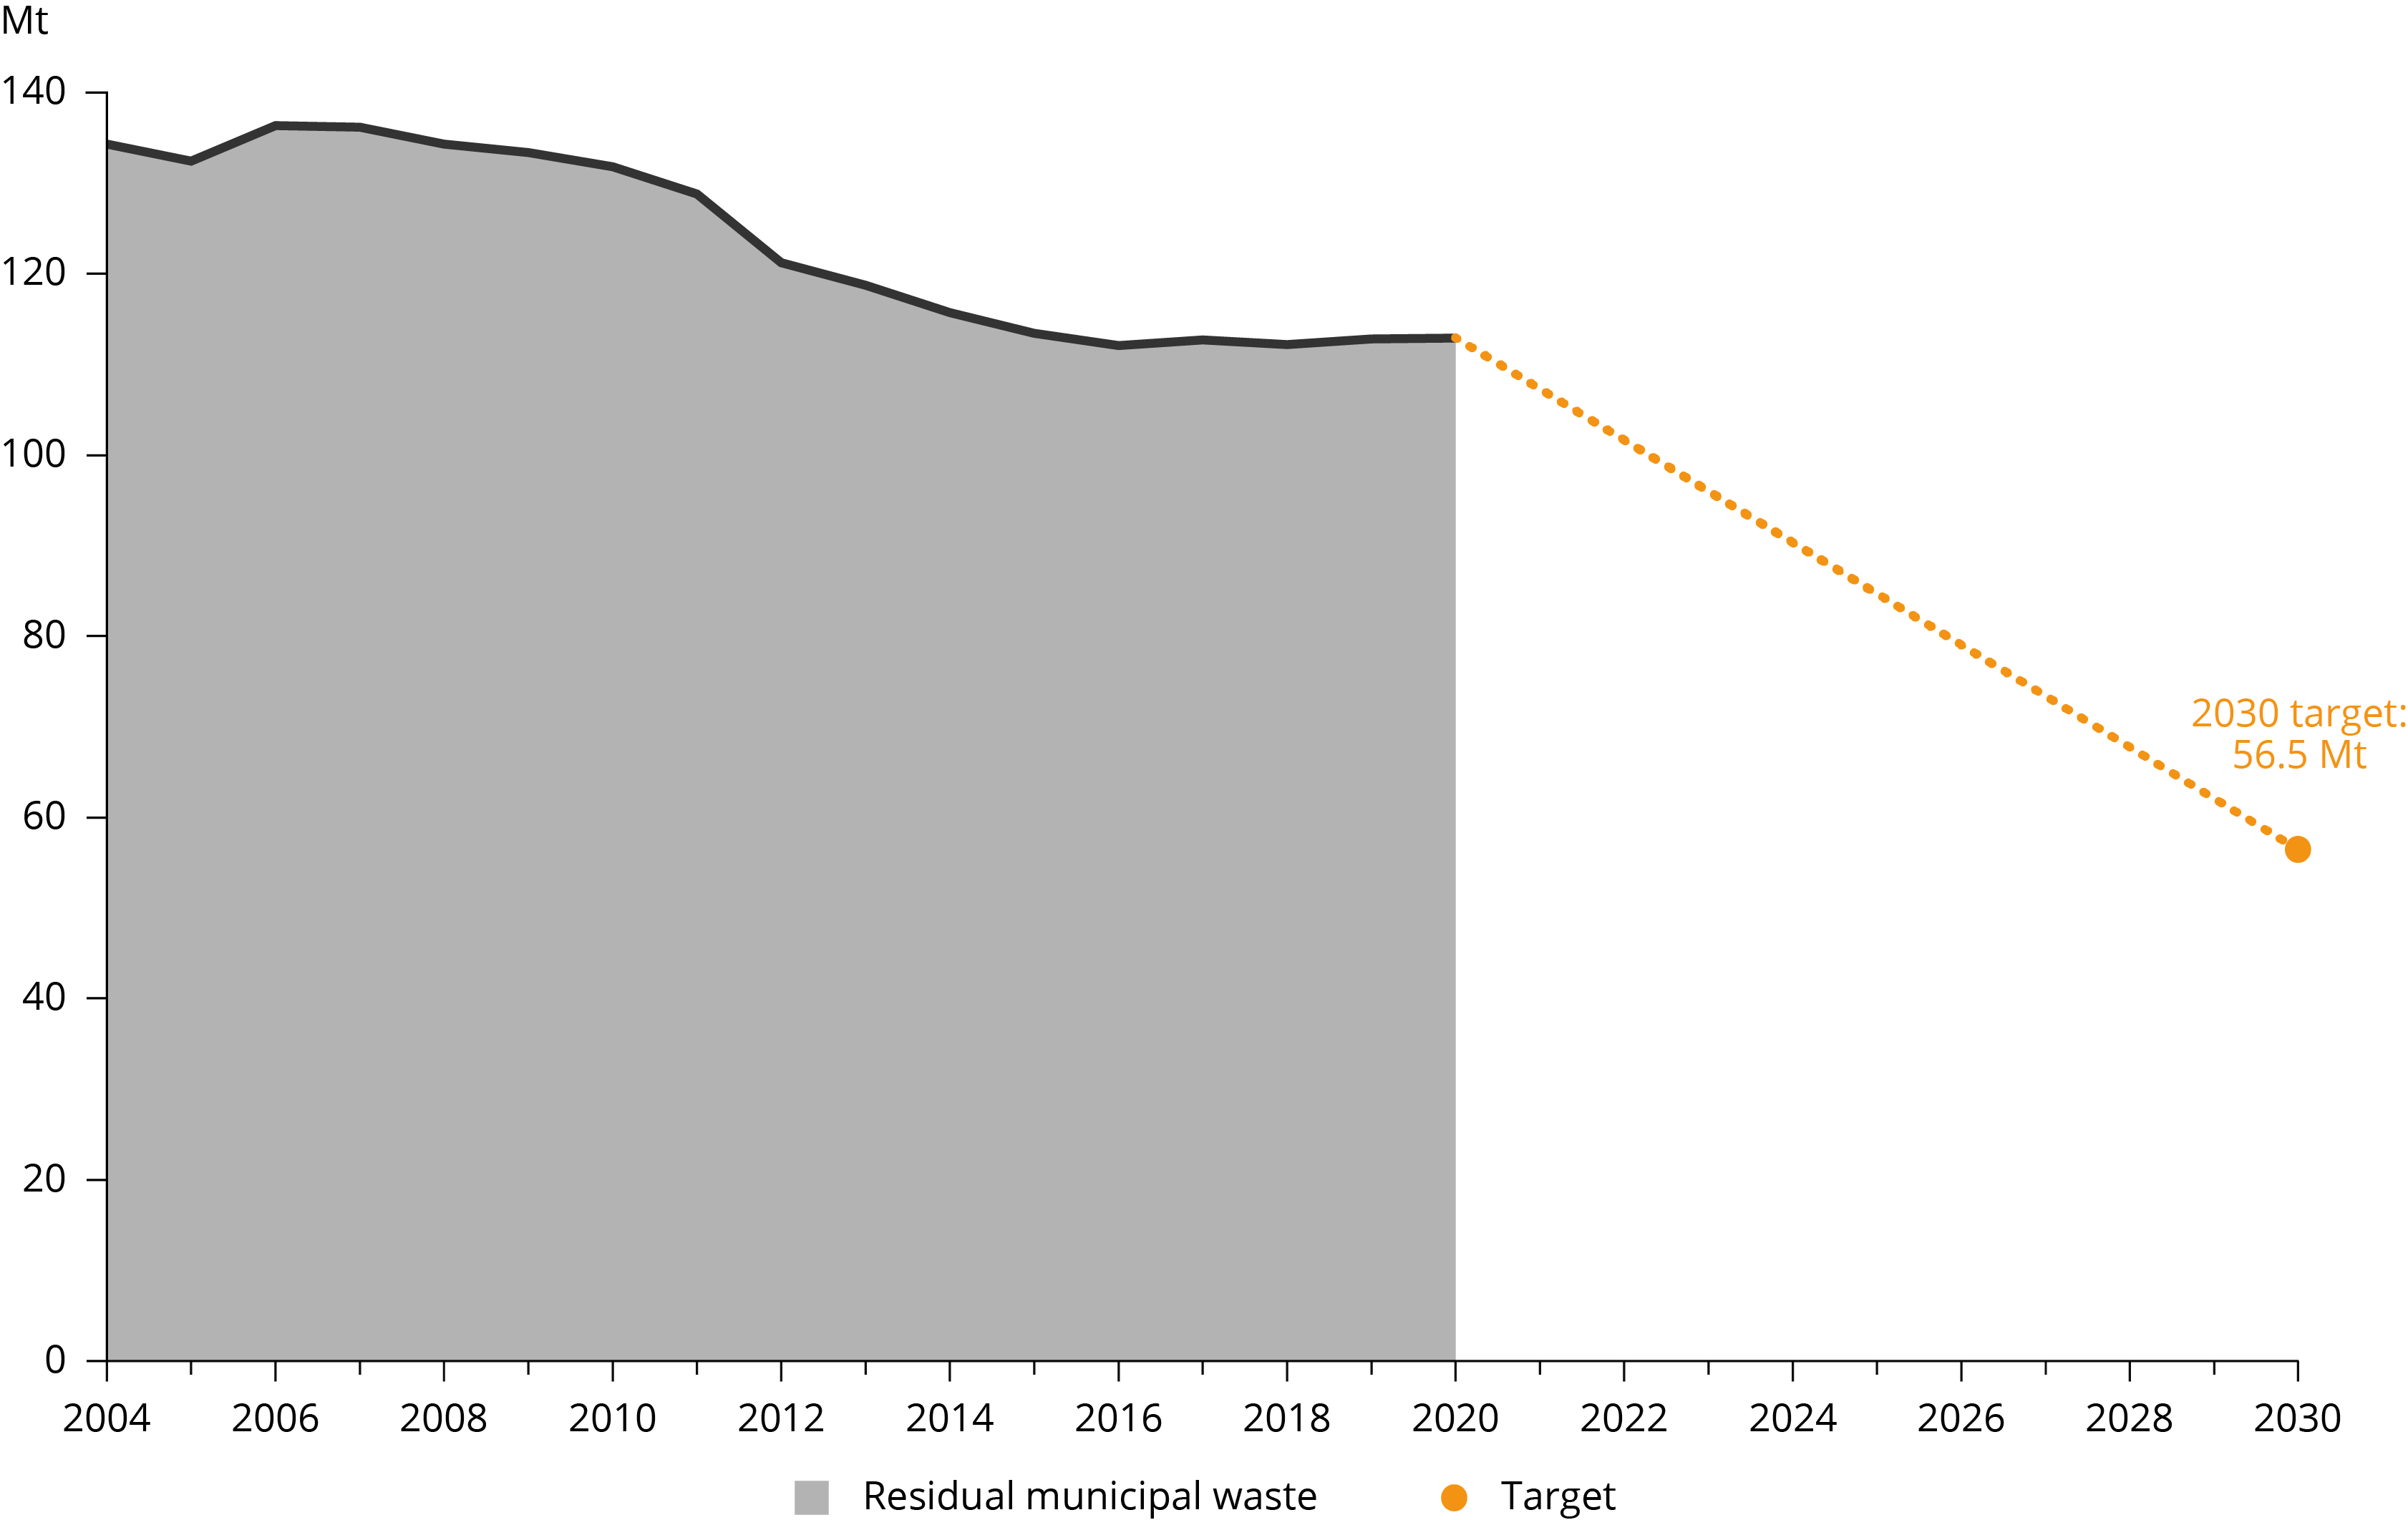 Figure 3. Trend in residual municipal waste for the 27 EU Member States (EU-27) and target for 2030